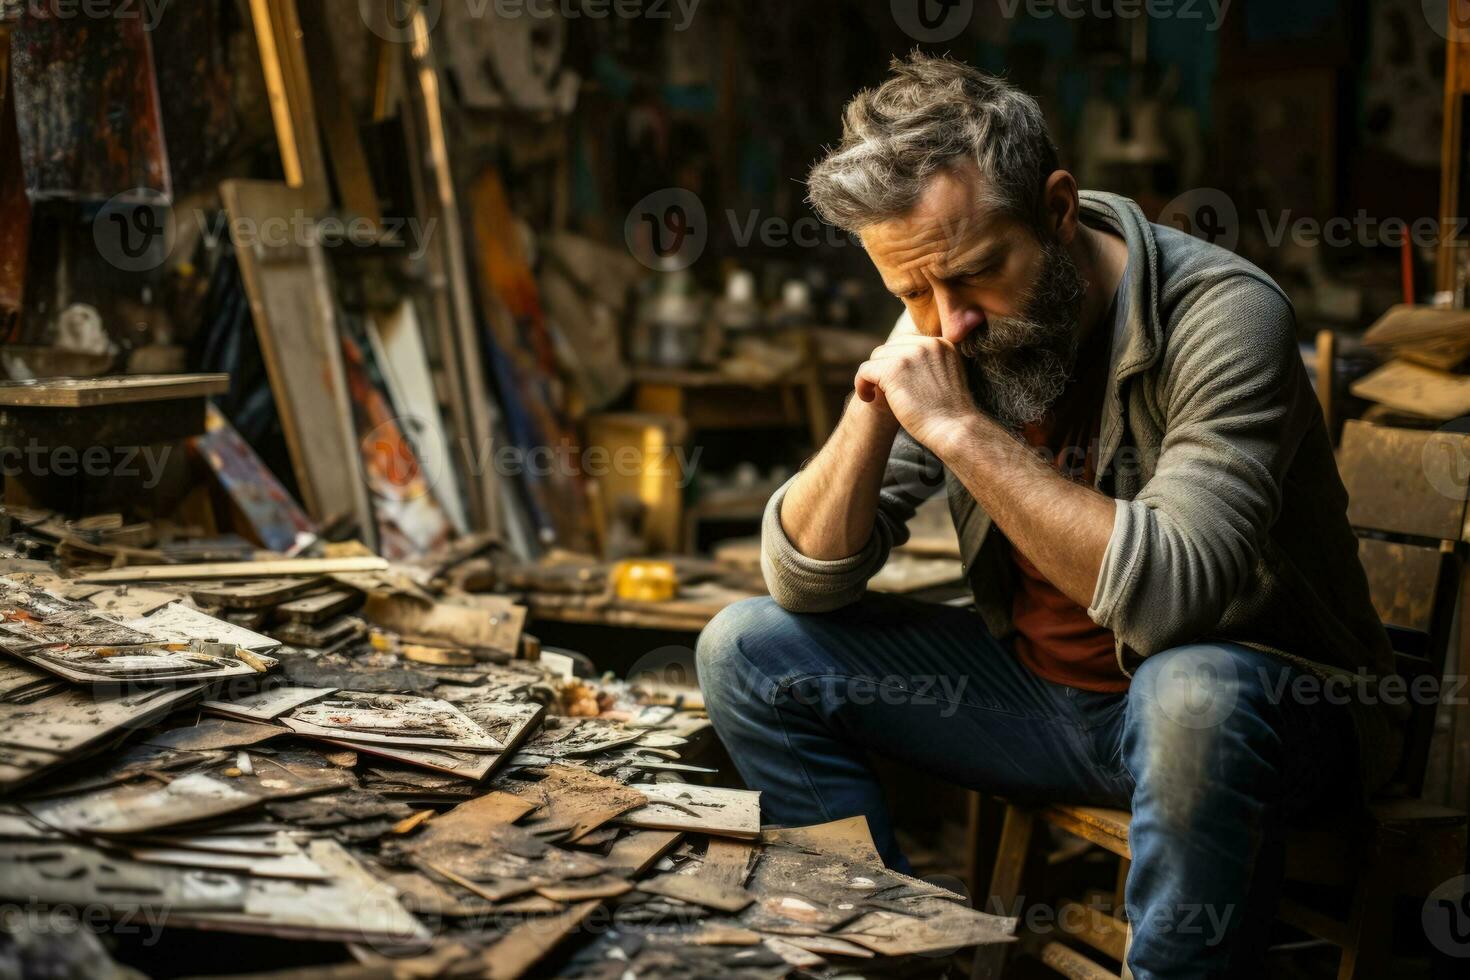 Depressed artist in unkempt workshop visibly grappling with emotional turmoil photo